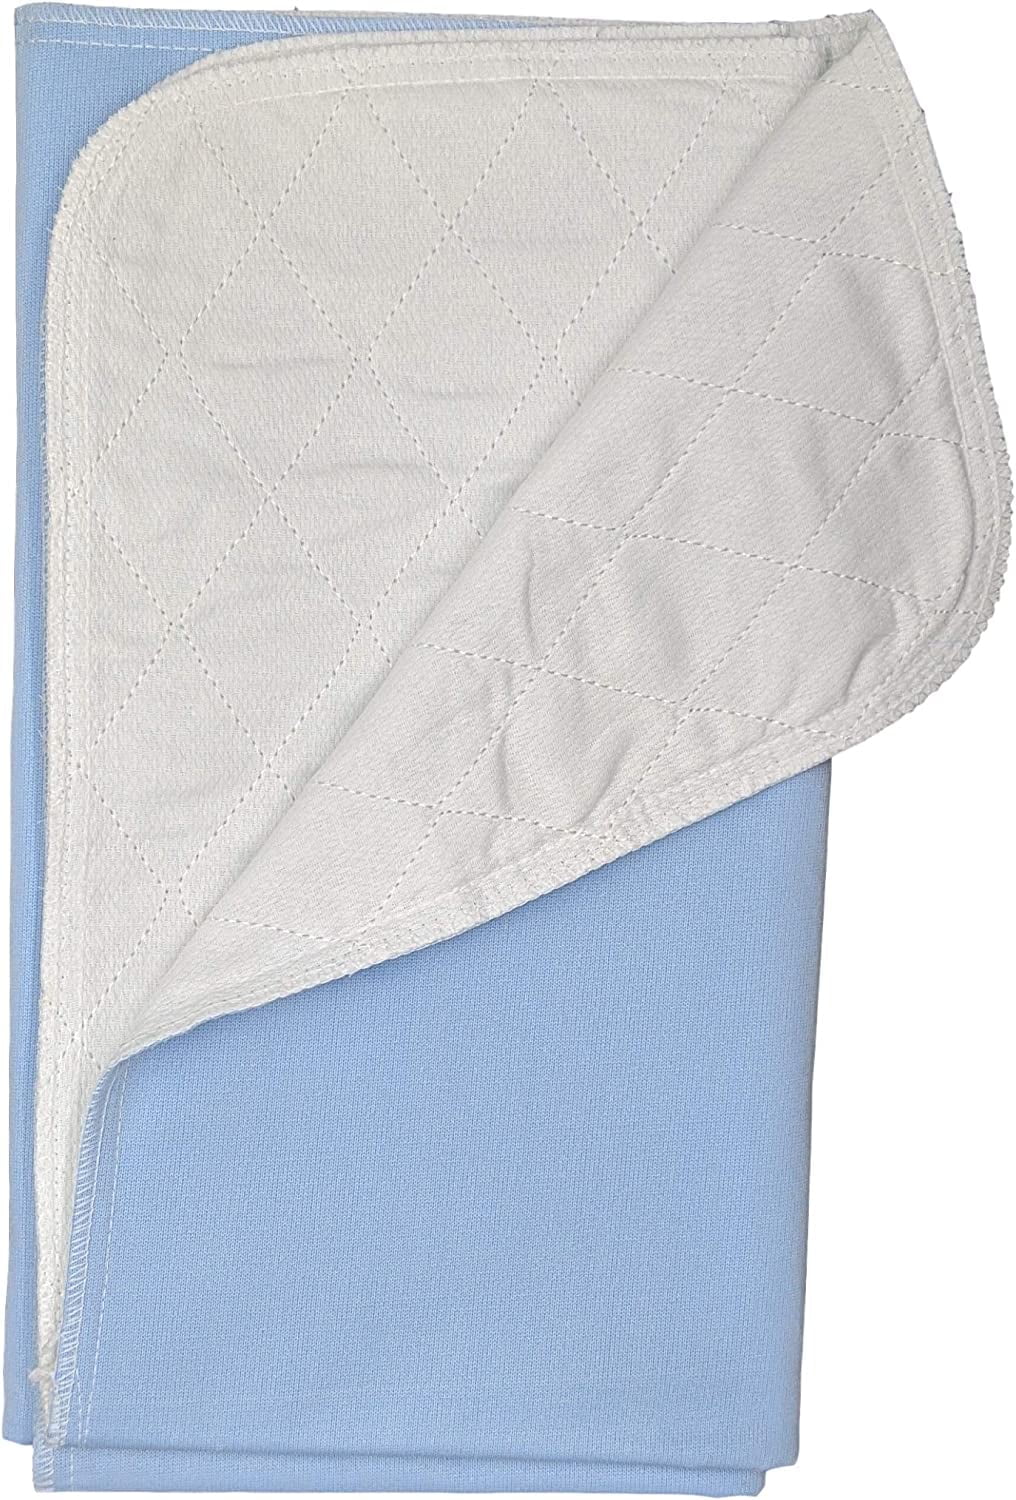 12 Pack Bed Pad Washable Incontinence Underpad - Absorbent Waterproof  Urinary Protection for Seniors Children 32 x 34 Blue 